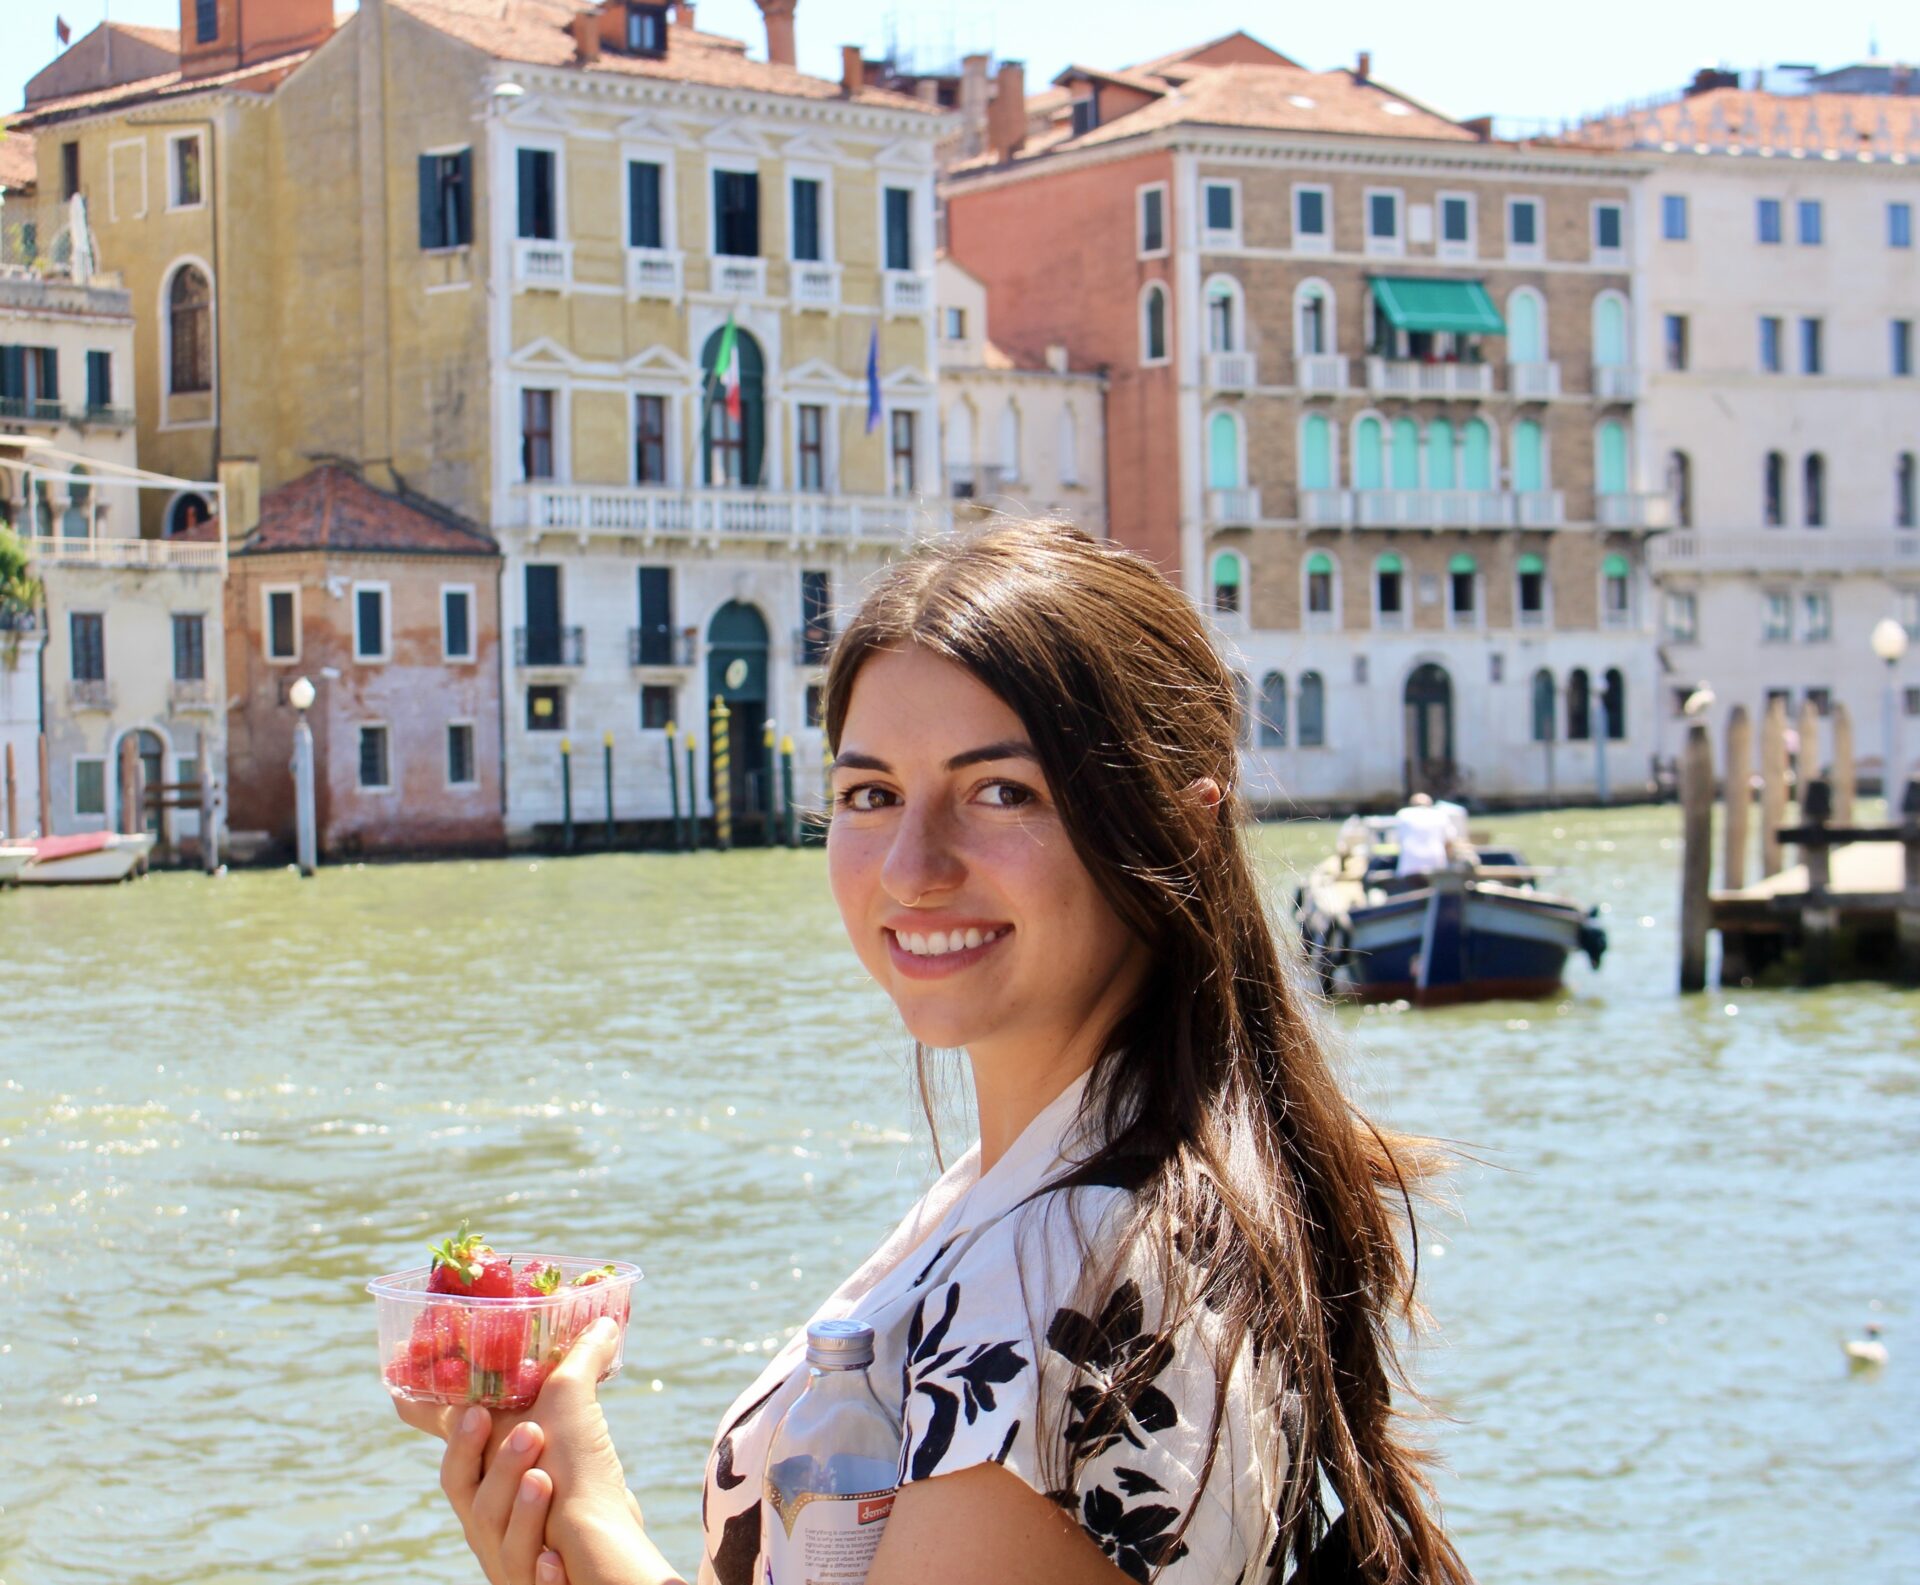 Woman with long hair holding a container of strawberries in front of a canal with a rowboat and old buildings in the background.